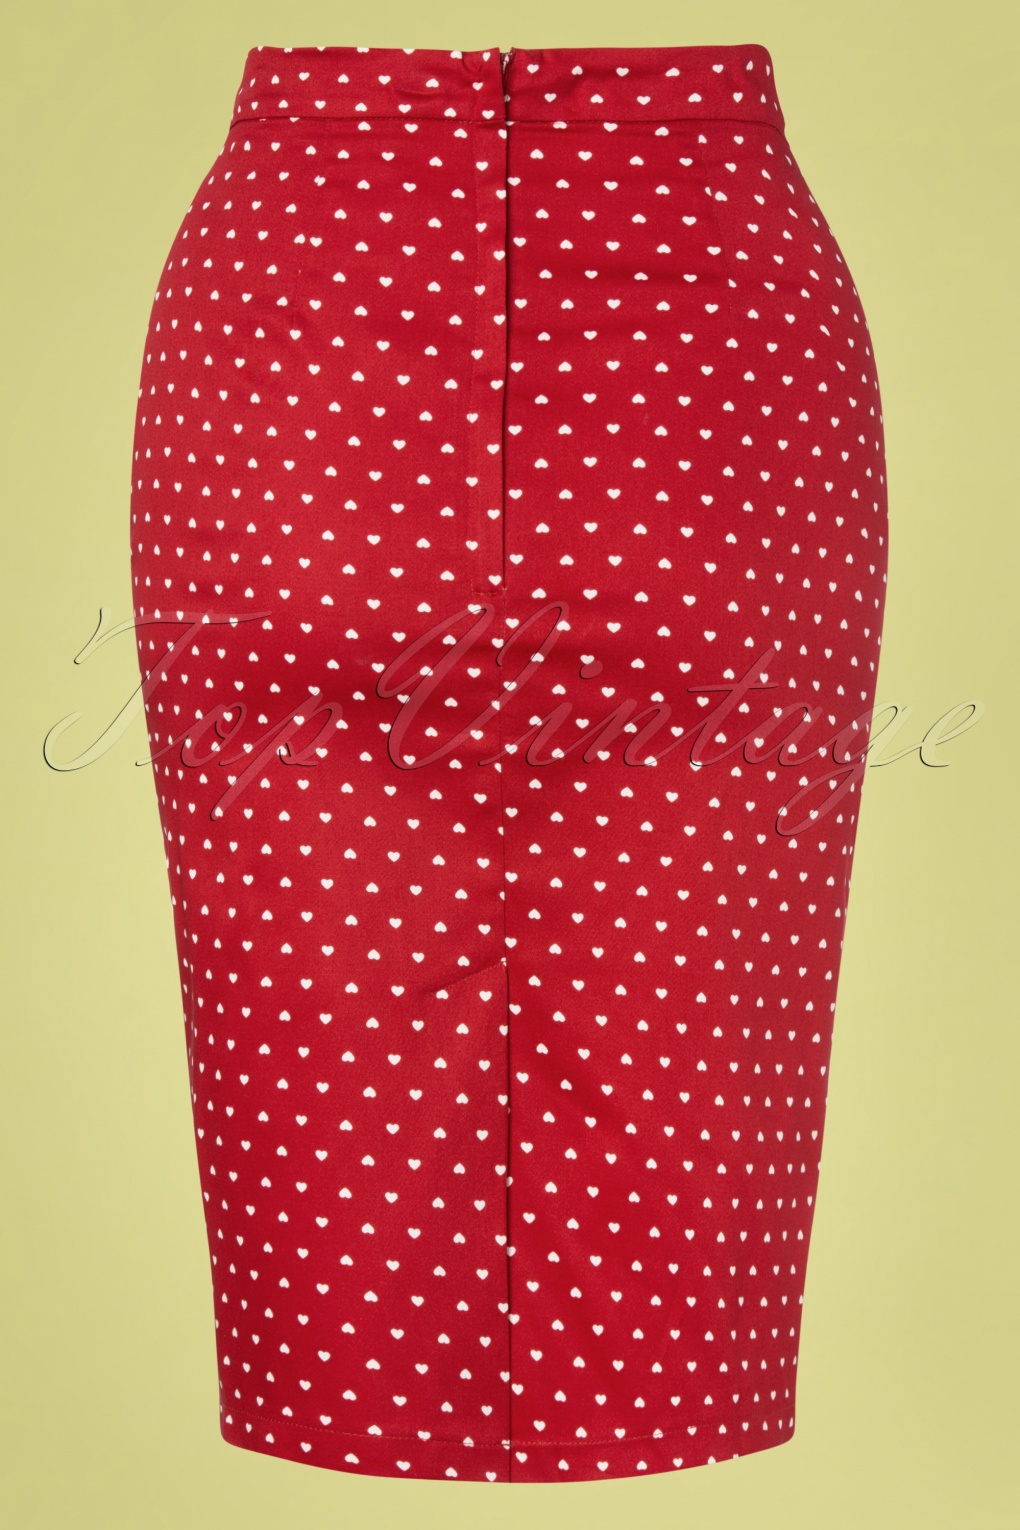 50s Polly Love Hearts Pencil Skirt in Red